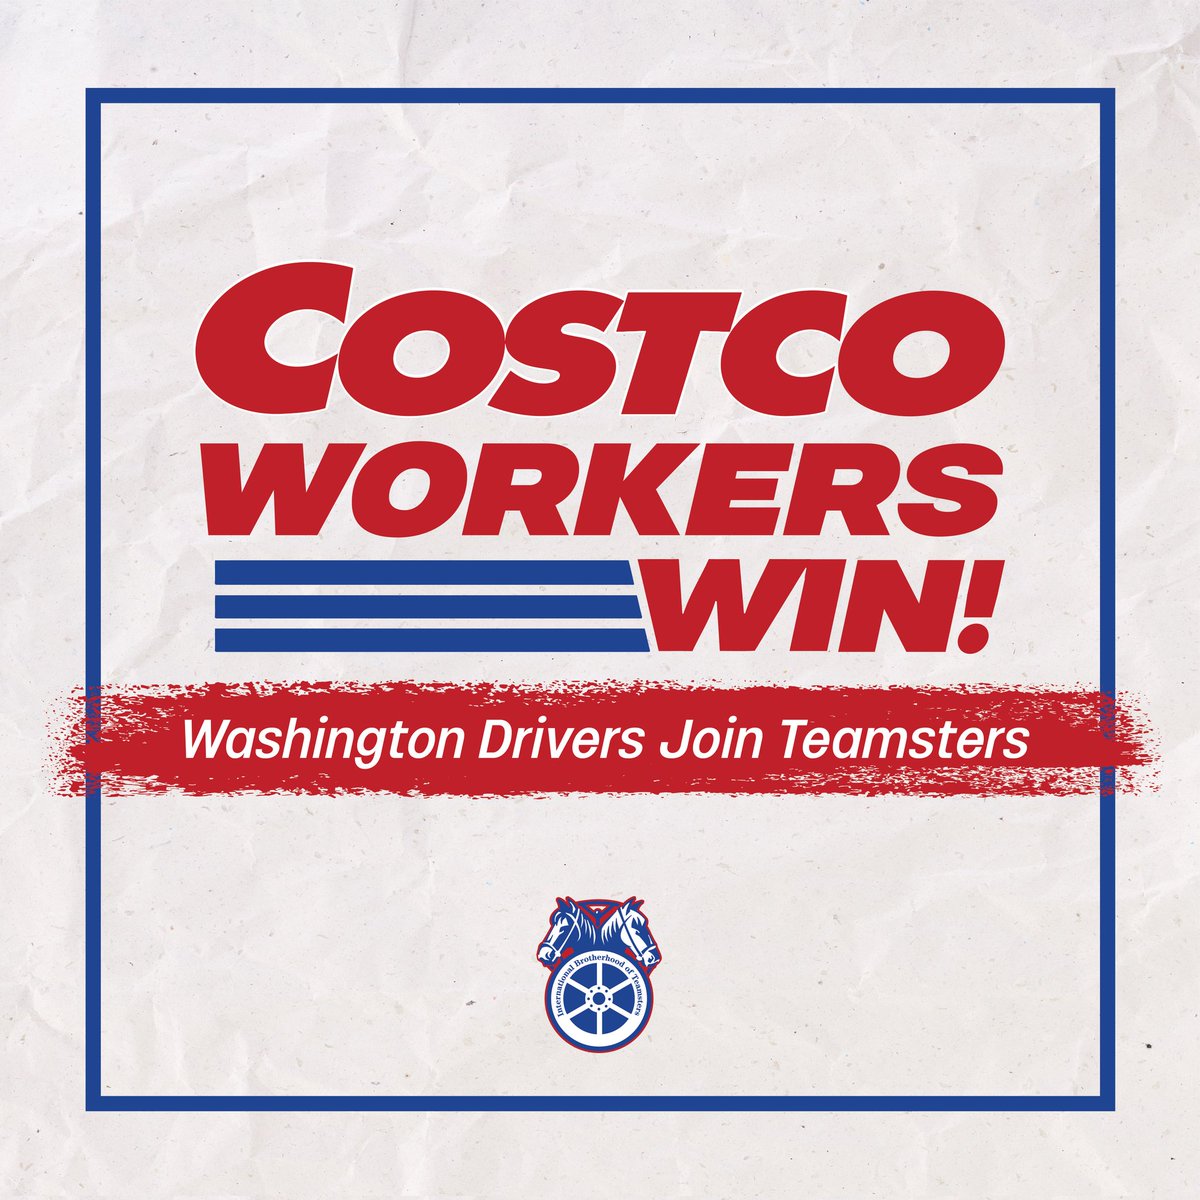 💥More than 150 Costco drivers in Sumner, Washington voted overwhelmingly yesterday to join #Teamsters Local 174, becoming the first-ever group of workers at a @Costco Distribution Center to organize with the Teamsters. They are seeking strong representation to address years of